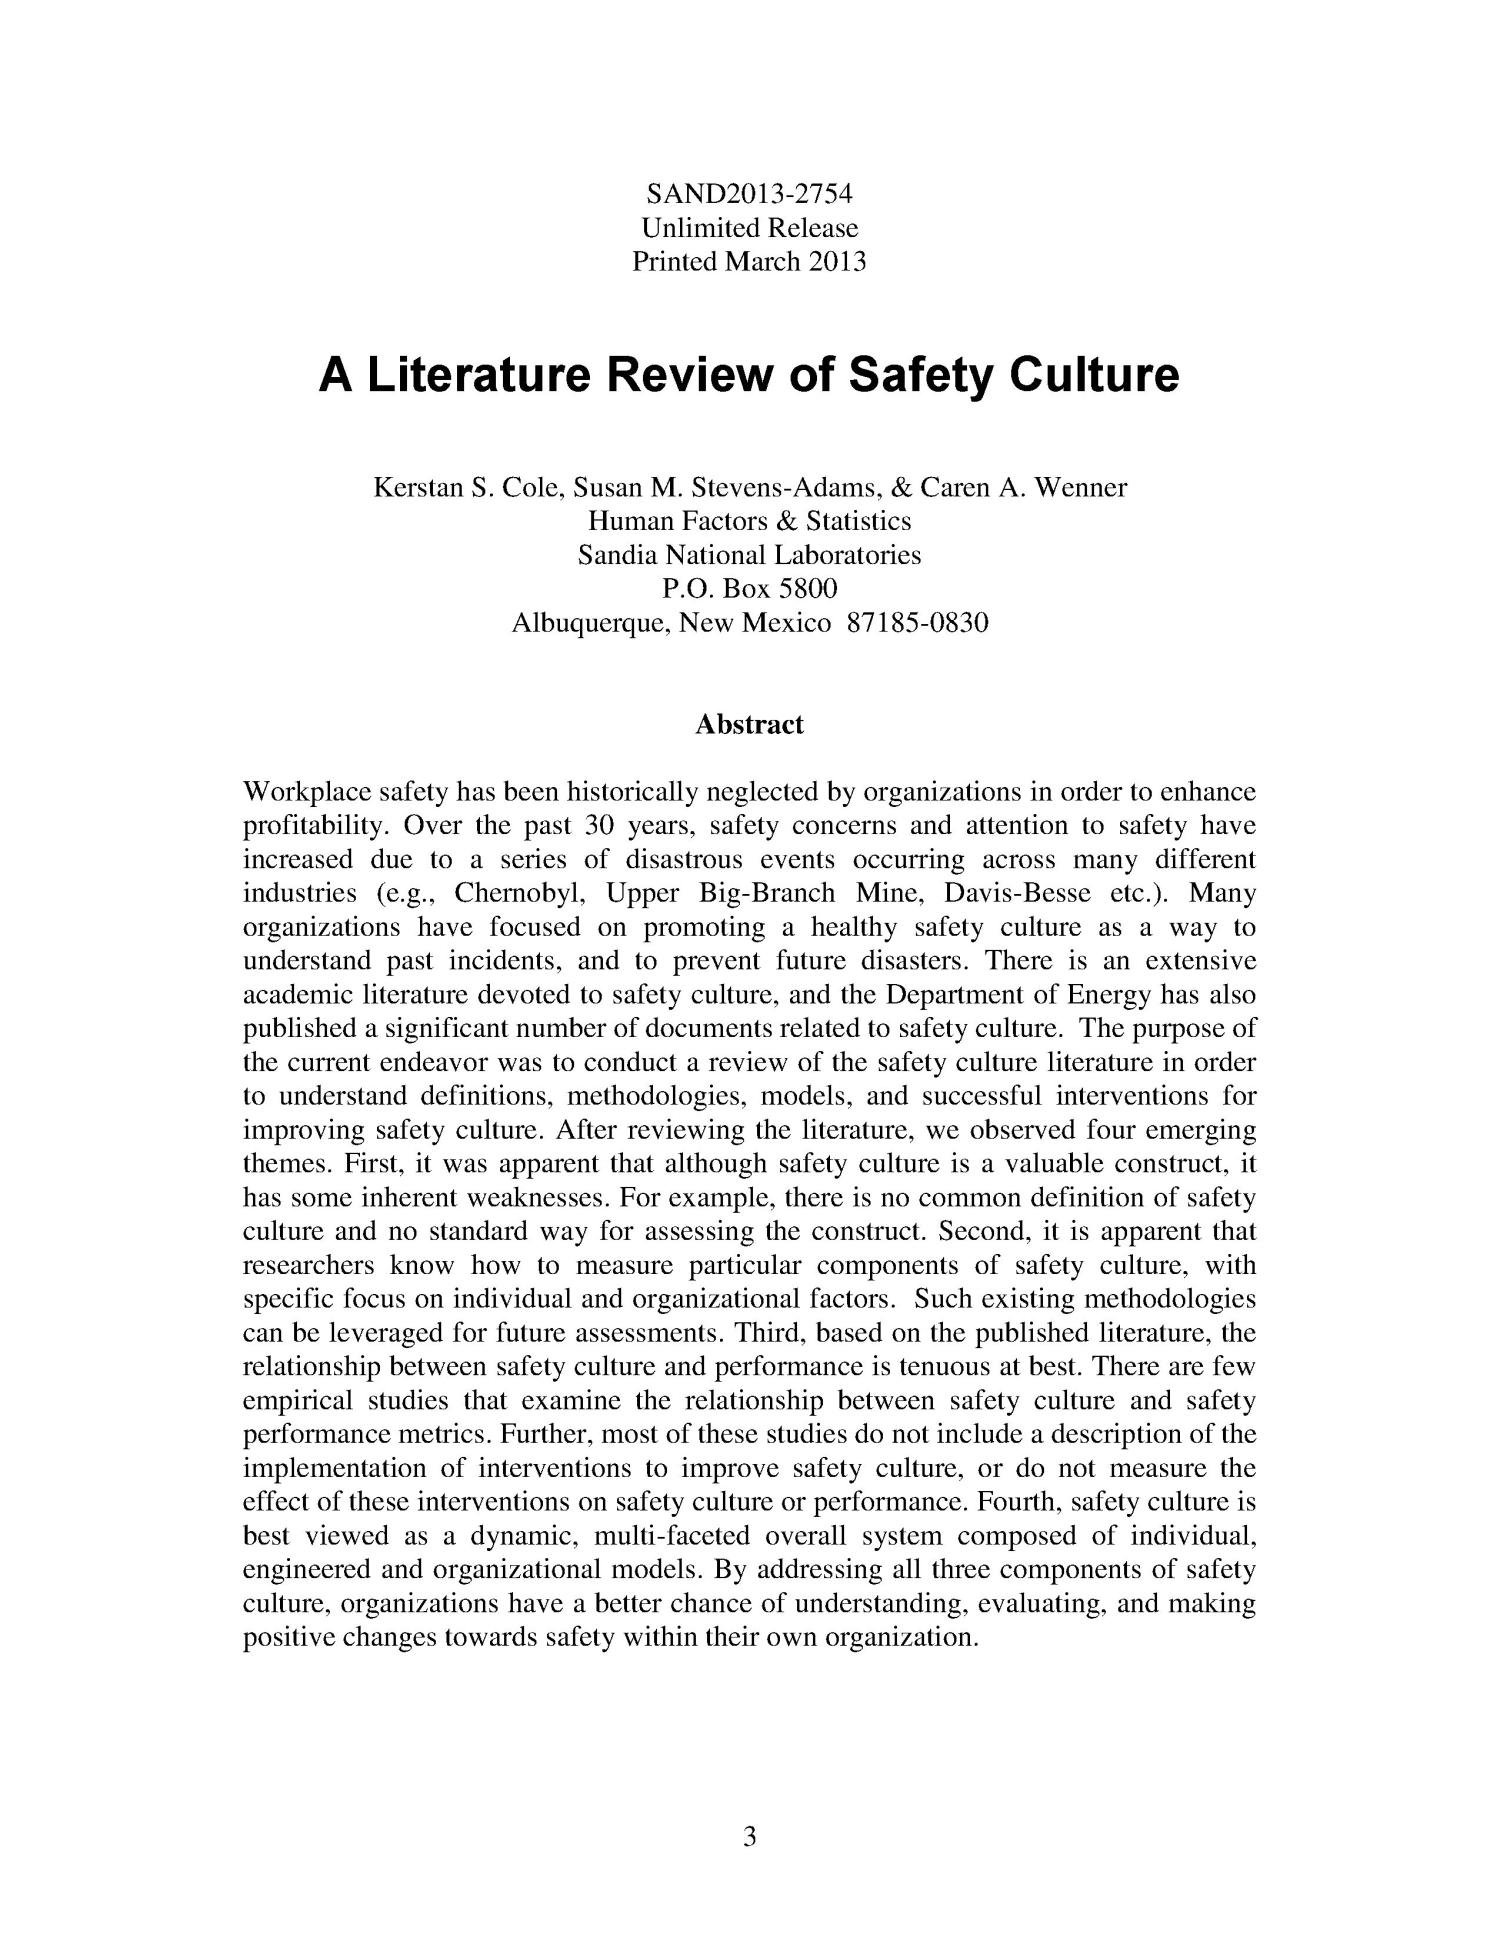 literature review safety management